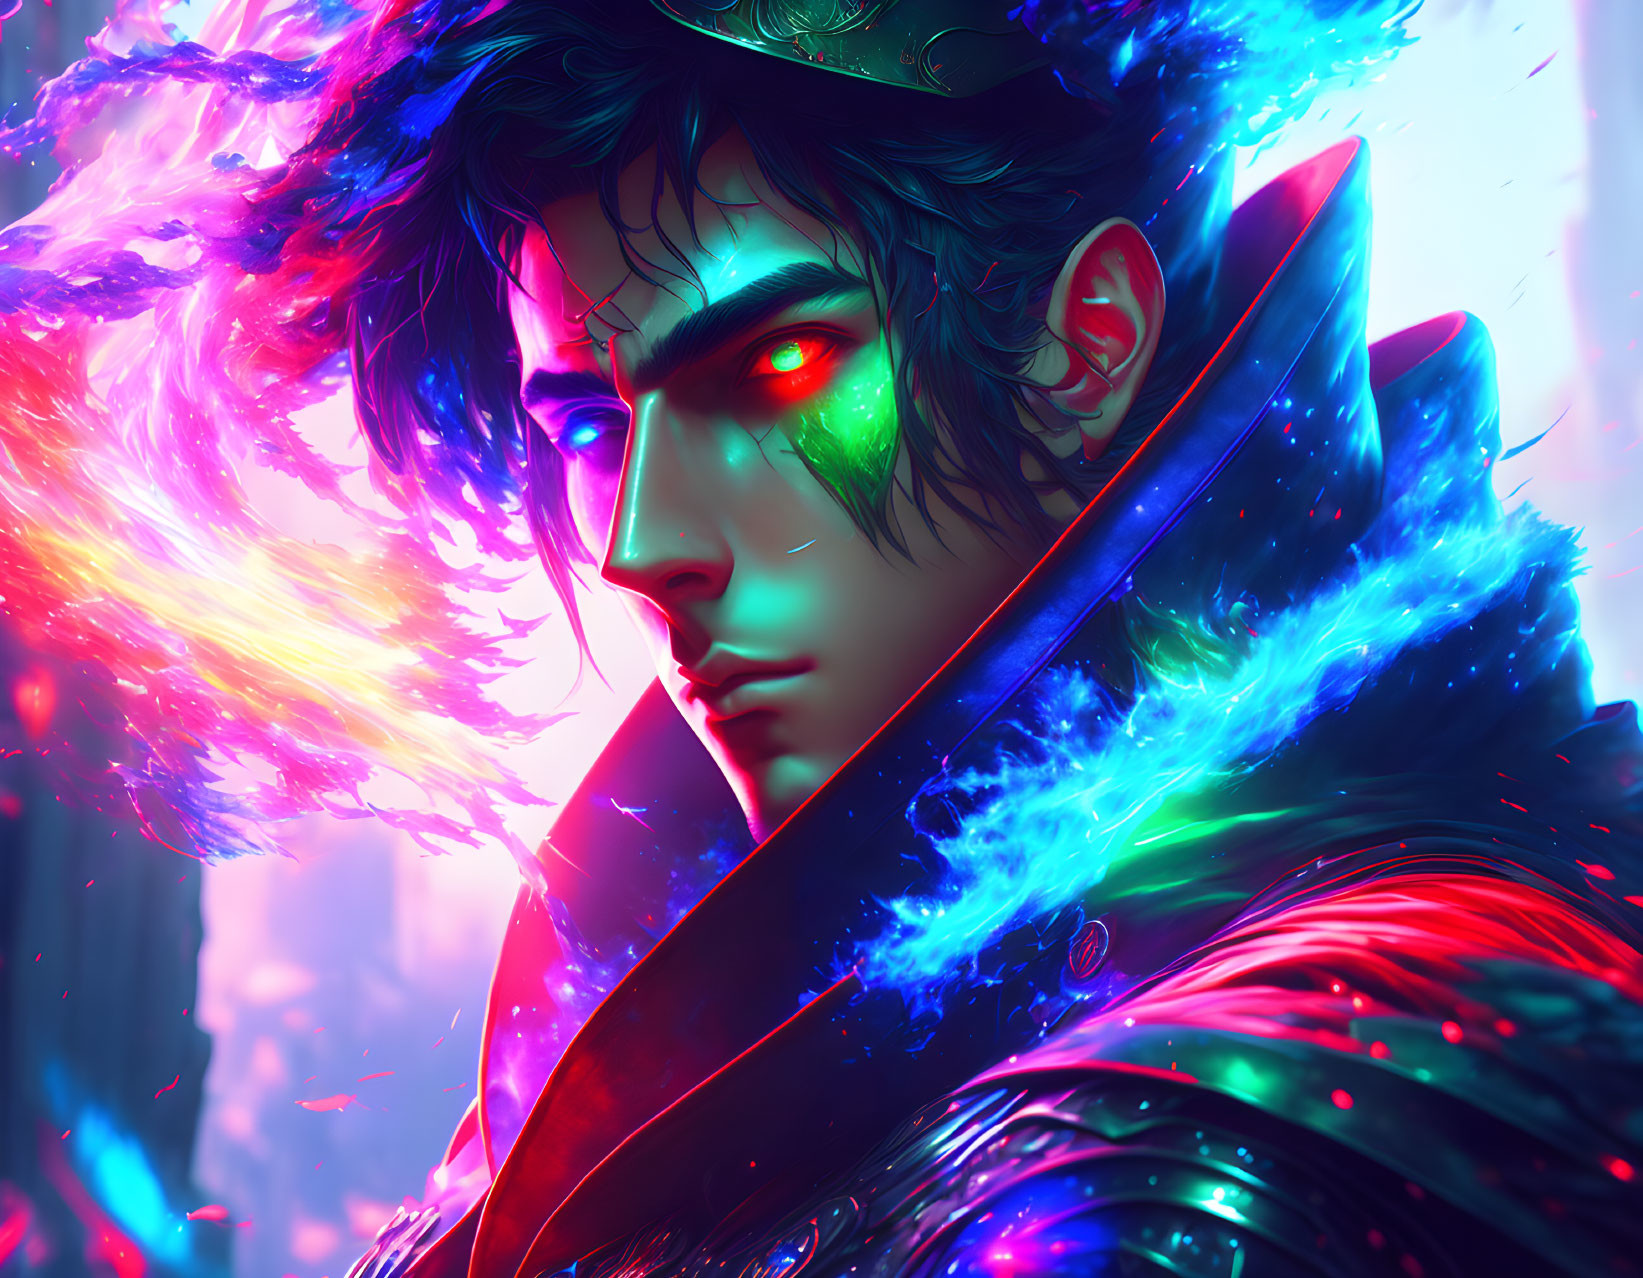 Colorful digital artwork: man with glowing red eye and vibrant hair in neon setting